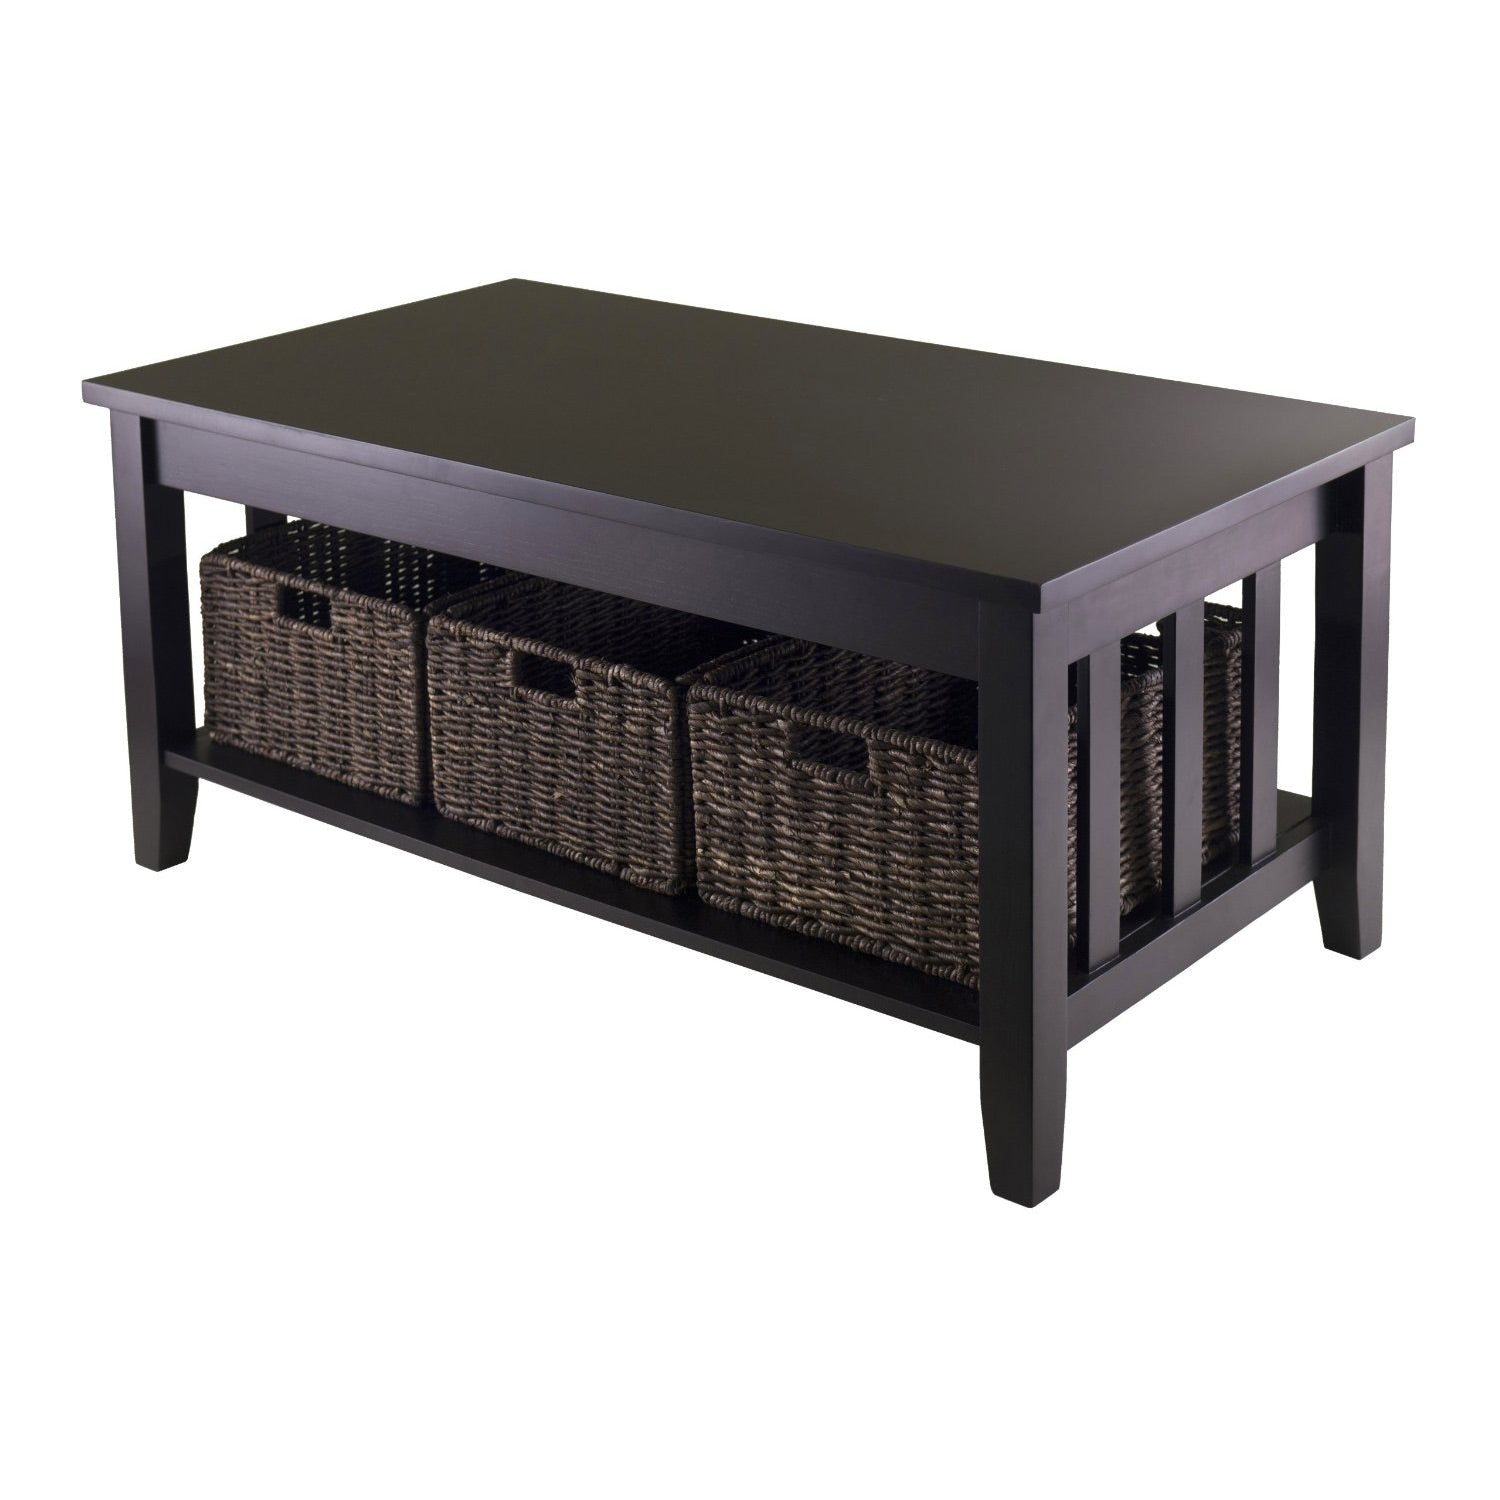 Living Room > Coffee Tables - Mission Style Dark Wood Coffee Table With 3-Folding Storage Baskets